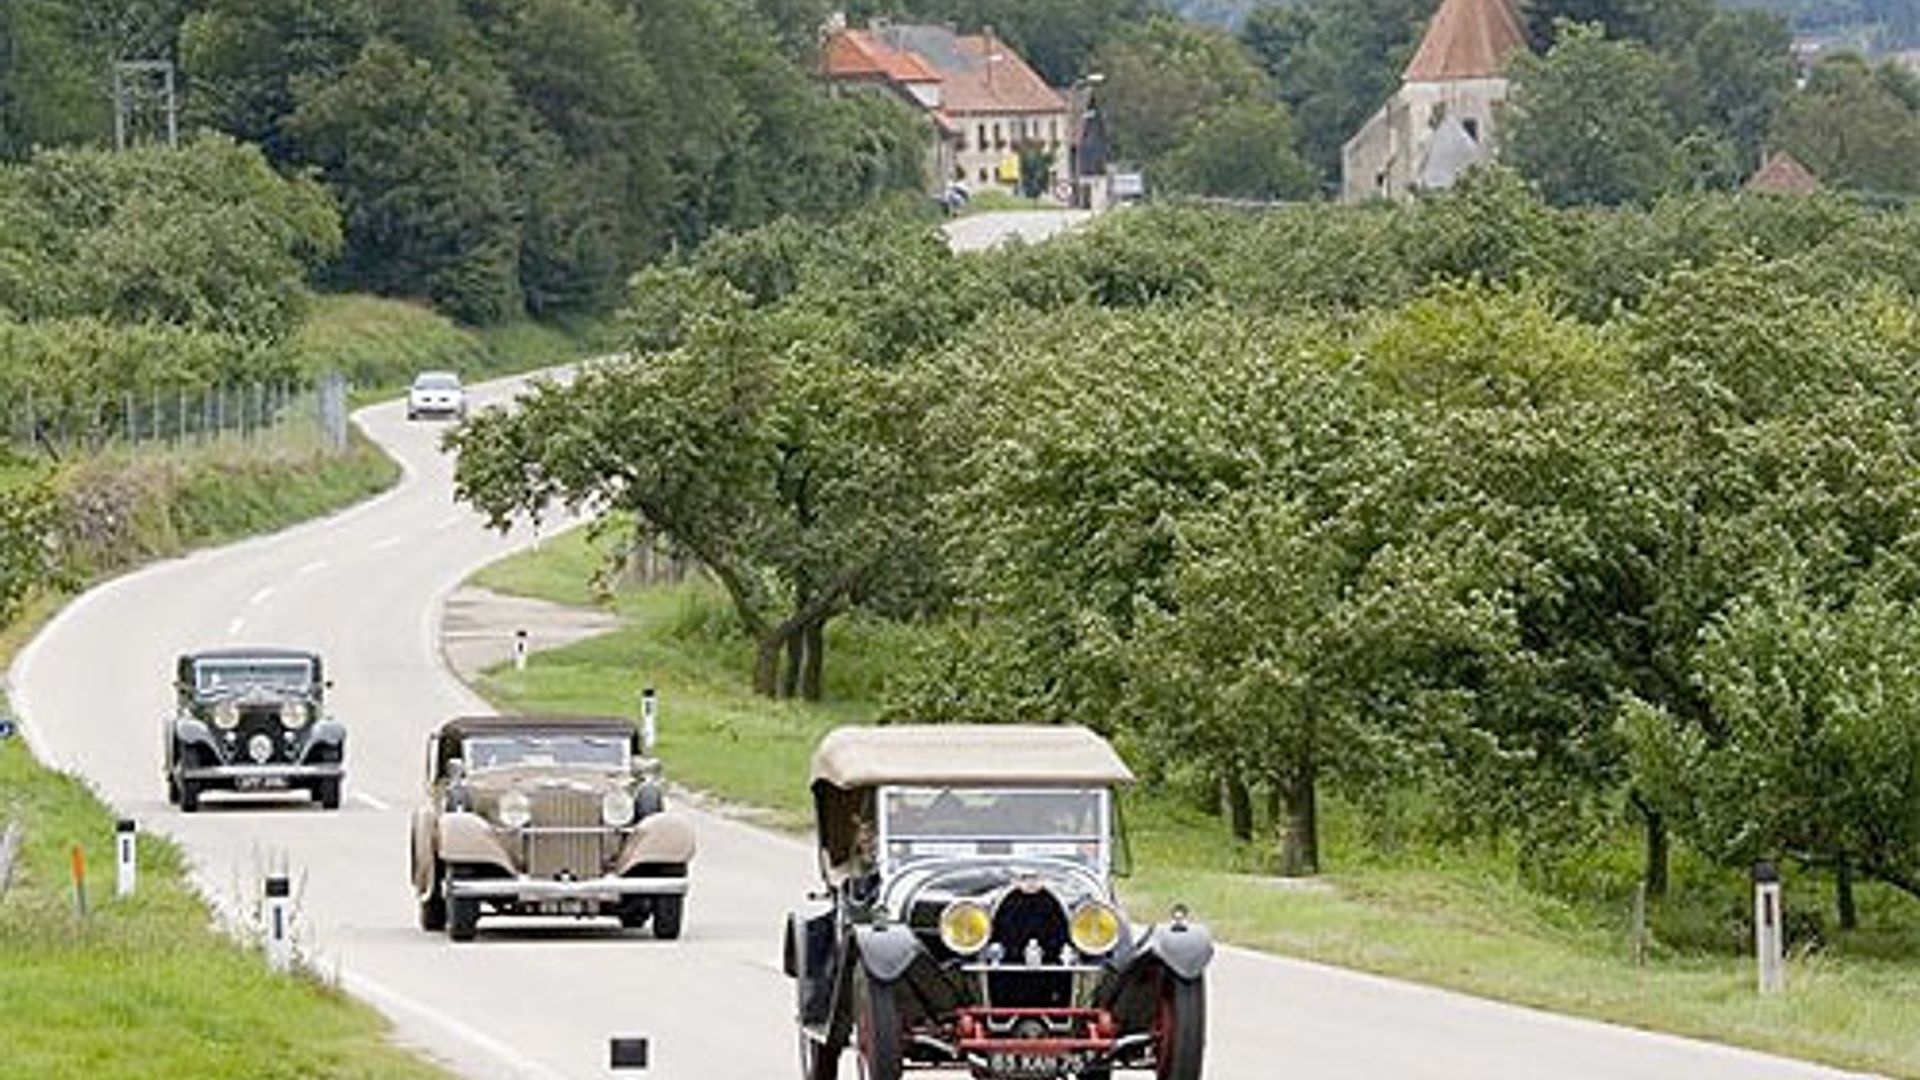 From Monte Carlo to Venice: The Louis Vuitton vintage car race